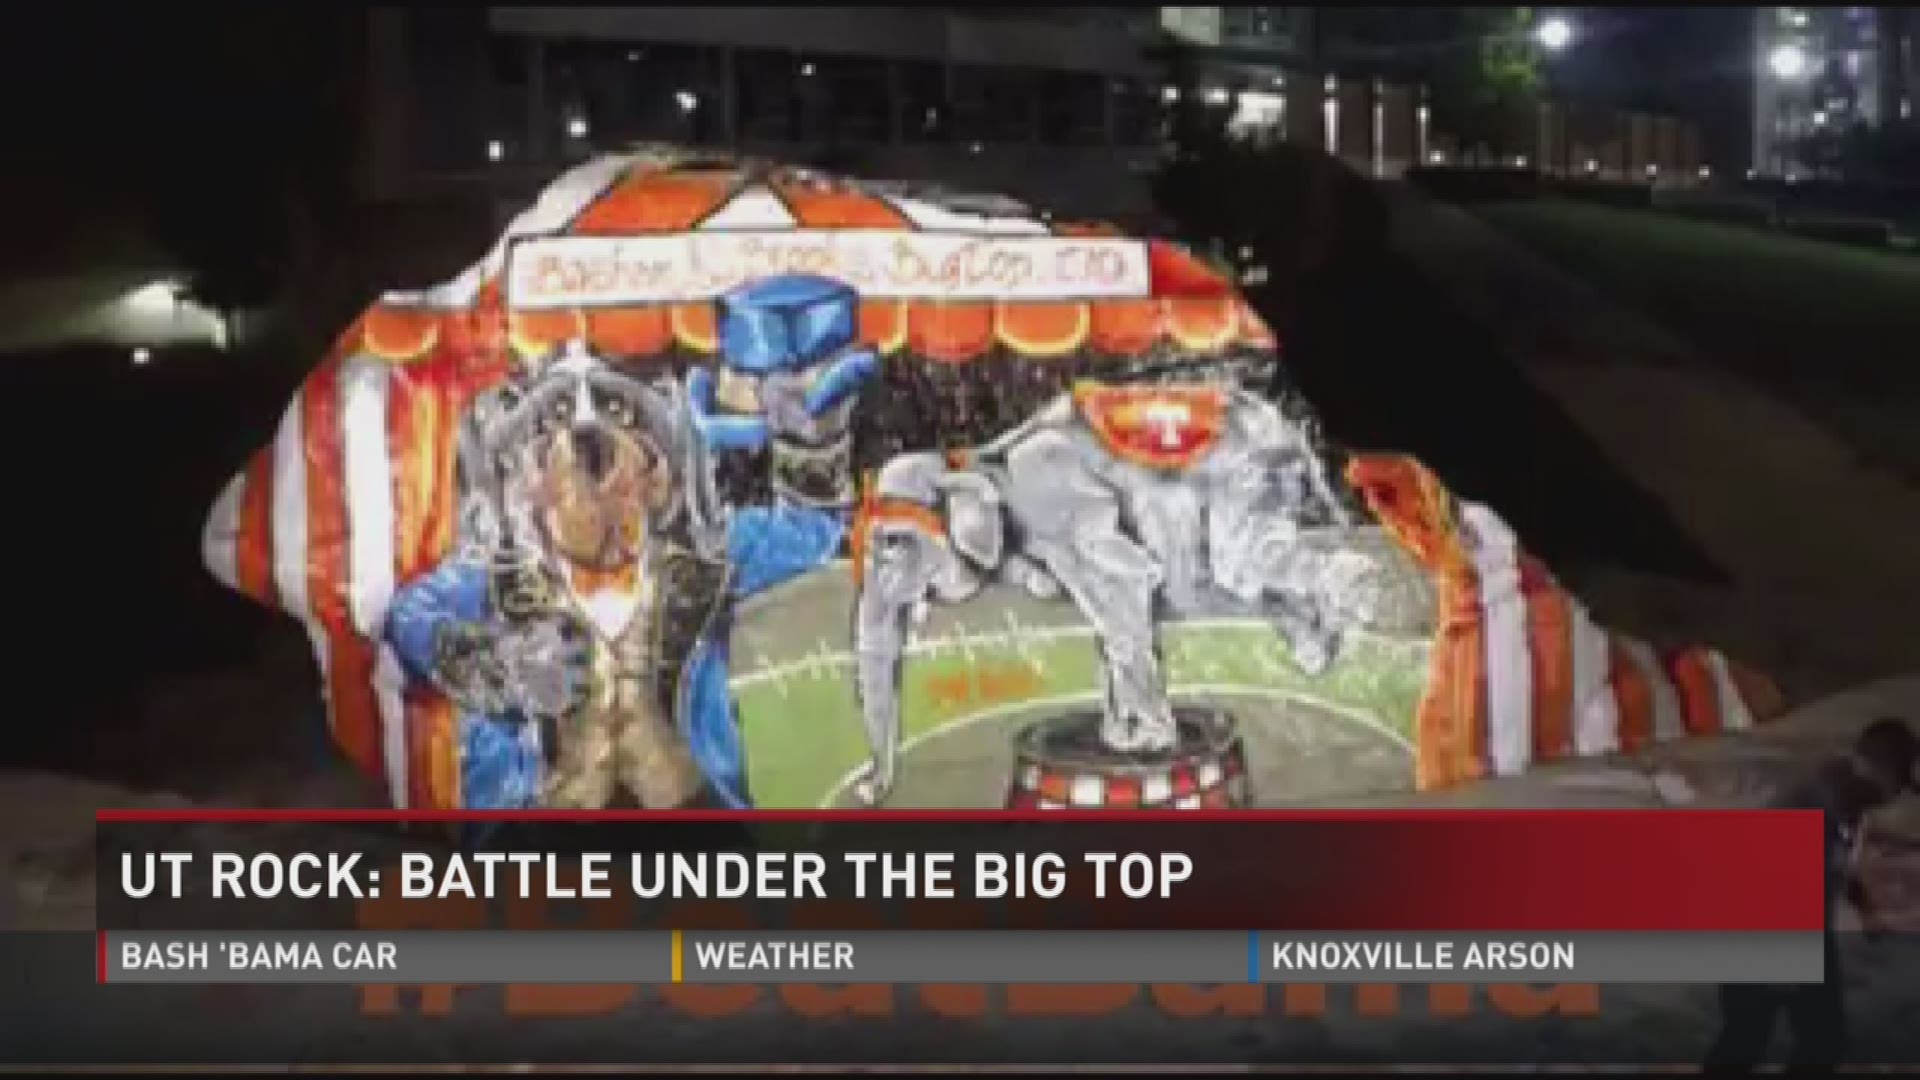 Oct. 15, 2016: UT student Payton Miller unveiled her latest masterpiece on the UT rock for the UT-Alabama game.